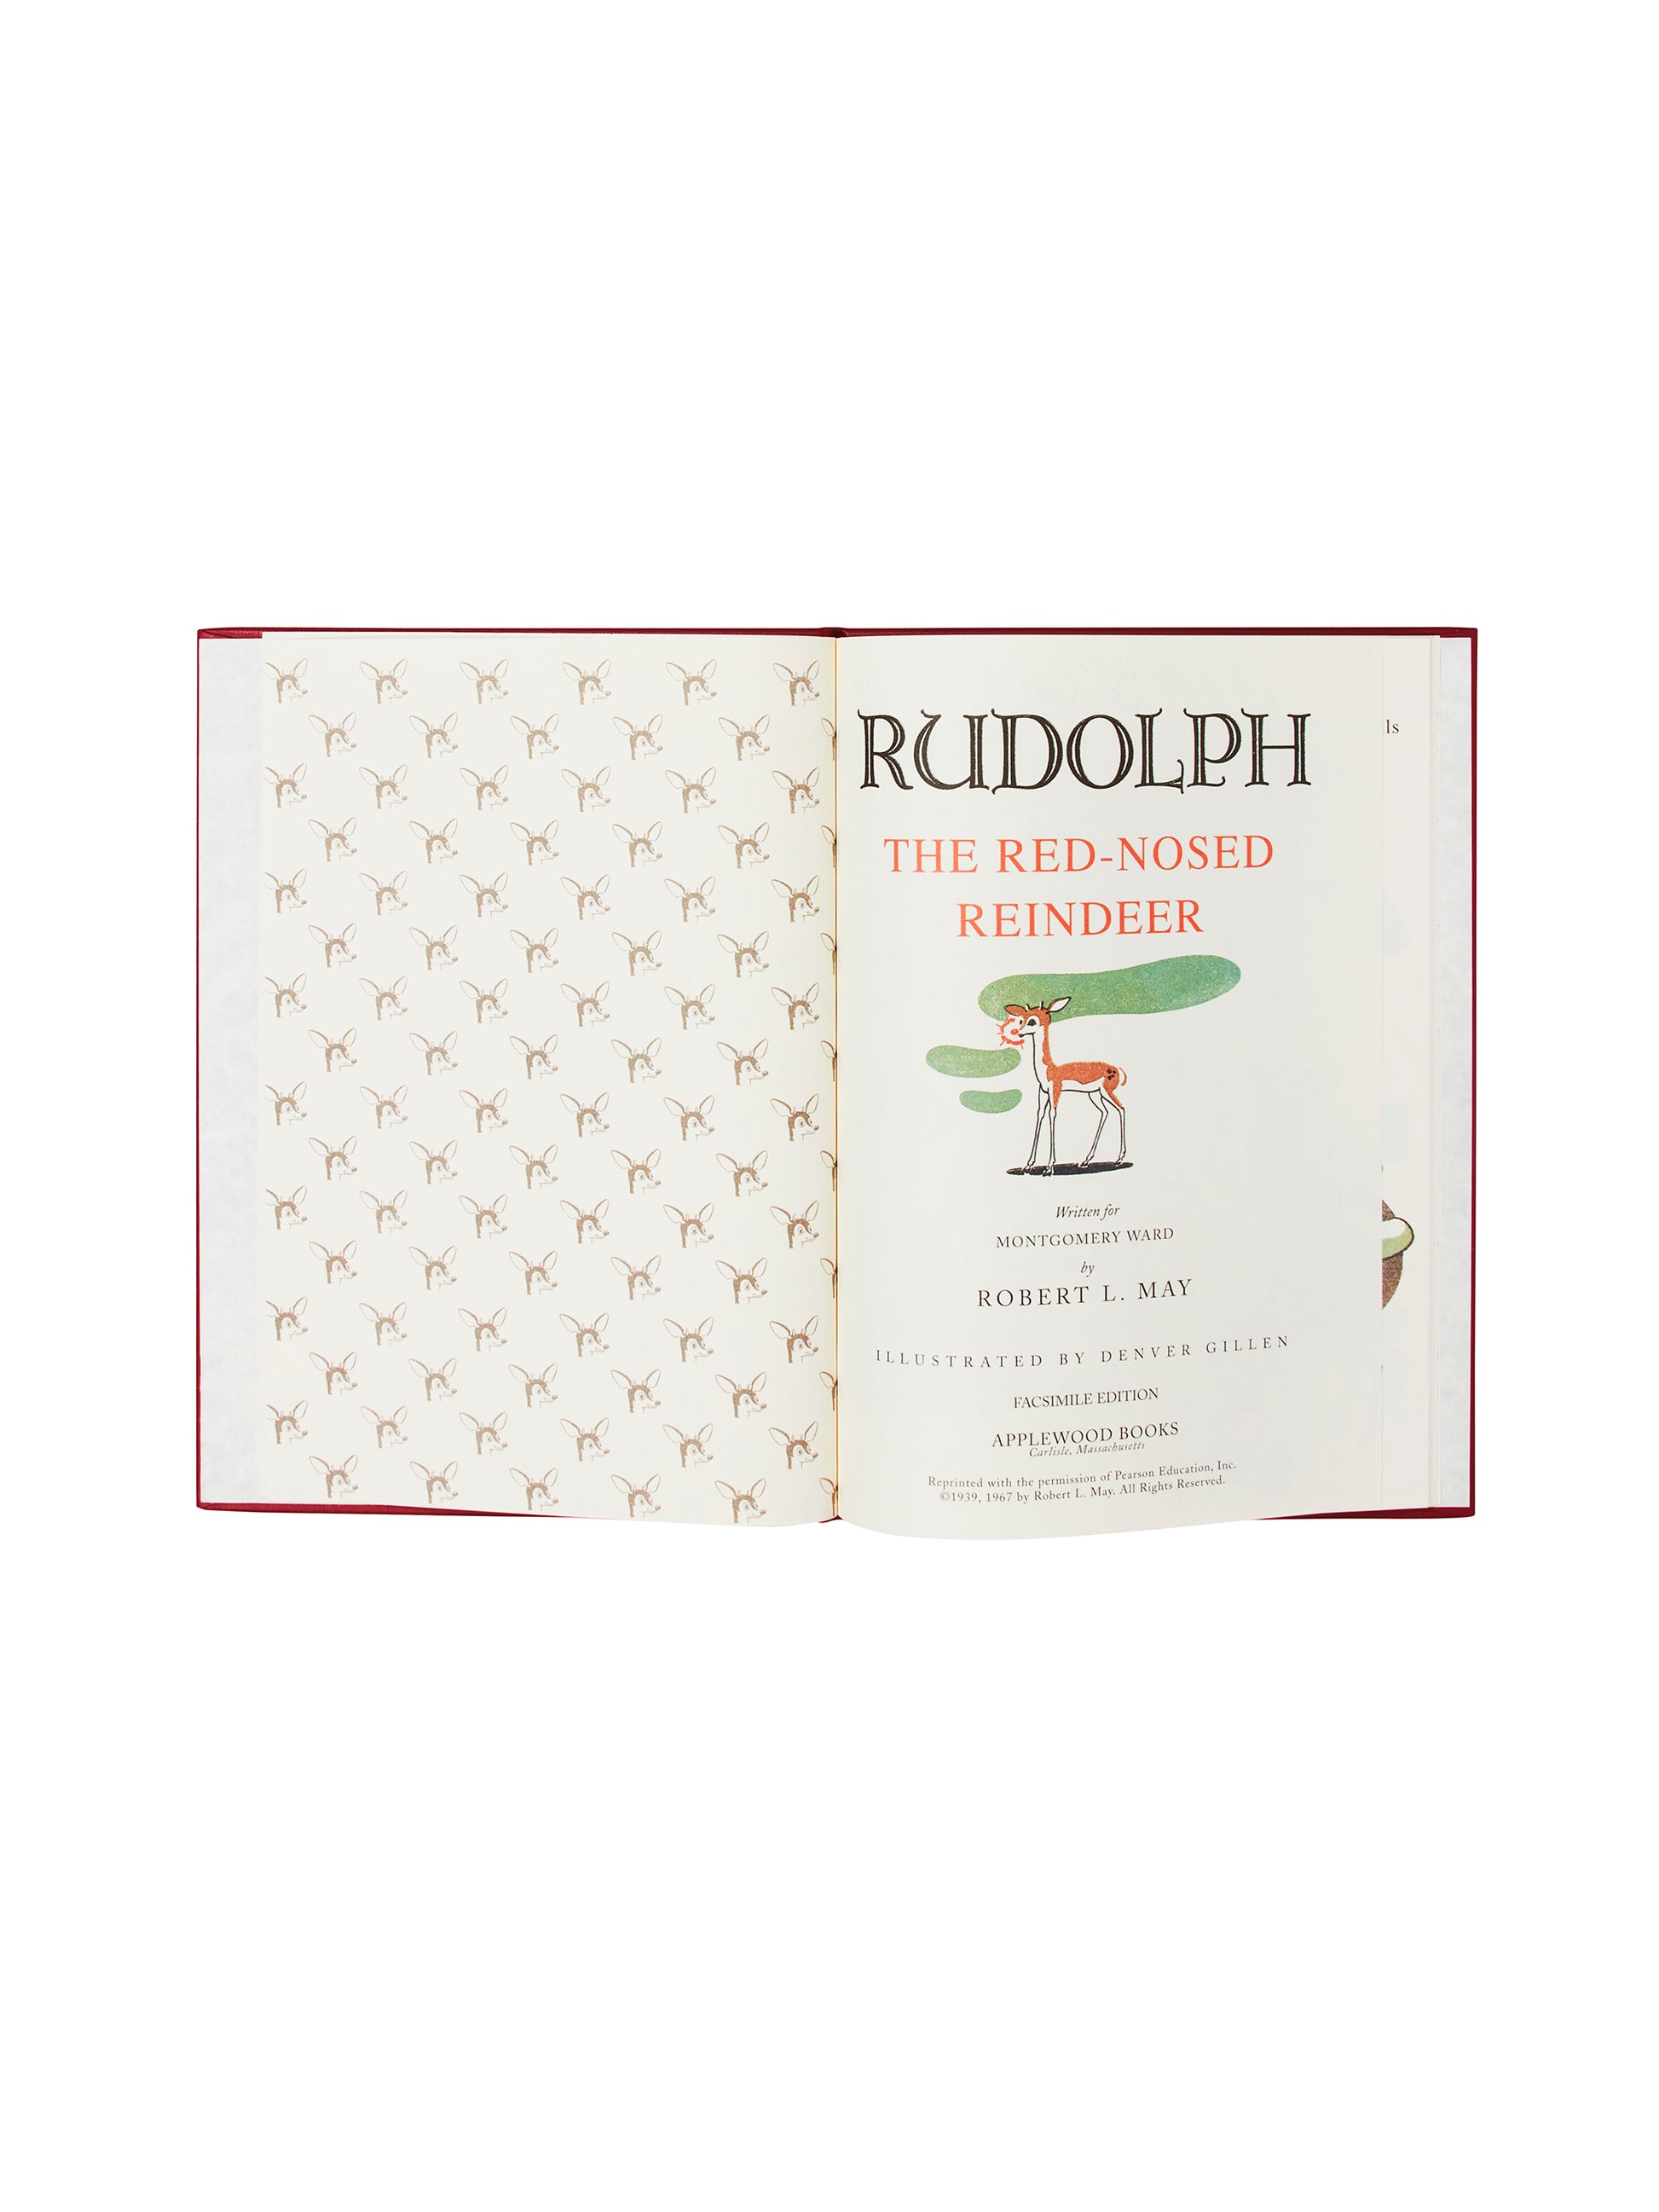 Rudolph the Red-Nosed Reindeer Leather Bound Edition Weston Table